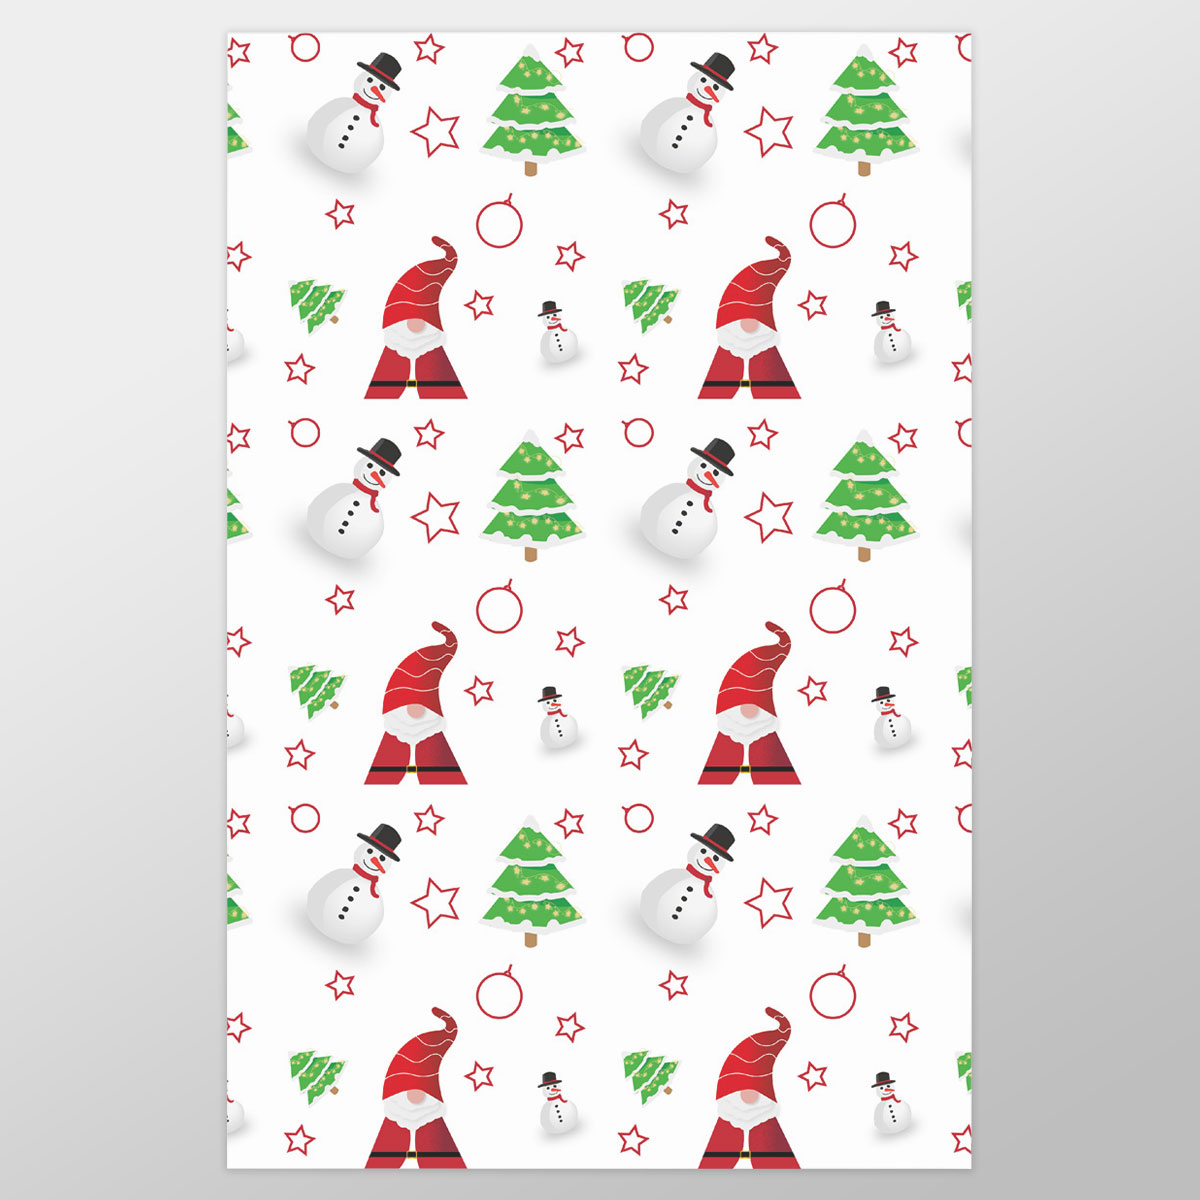 Santa Claus, Snowman Clipart And Pine Tree Silhouette Seamless Pattern Wrapping Paper